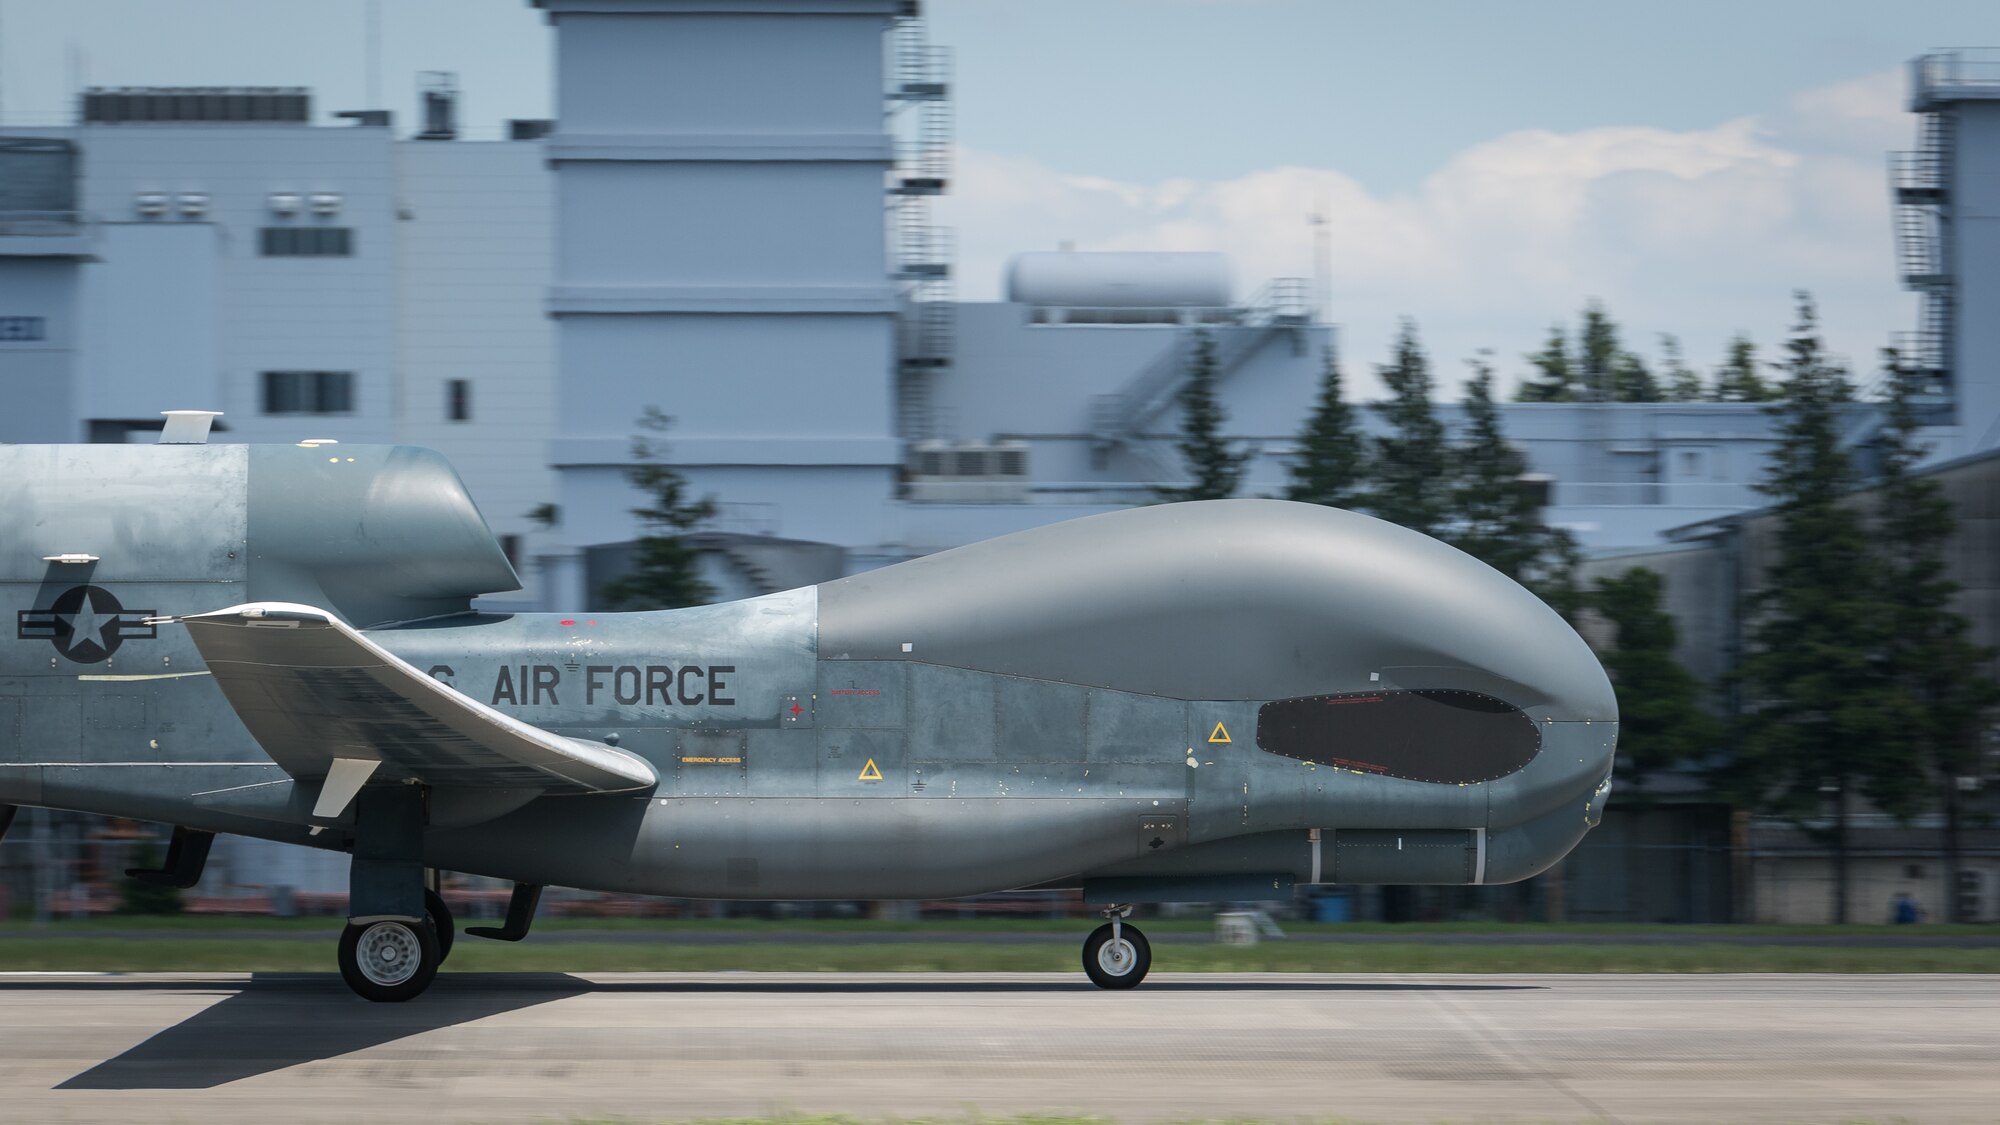 An RQ-4 Global Hawk, assigned to the 319th Operations Group, Detachment 1, Andersen Air Force Base, Guam, lands at Yokota Air Base, Japan, Aug. 5, 2019, for a rotational deployment. The movement maintains operations for Global Hawks during months of inclement weather endured at Andersen AFB, such as typhoons and other scenarios which have the potential to hinder readiness. (U.S. Air Force photo by Senior Airman Juan Torres)